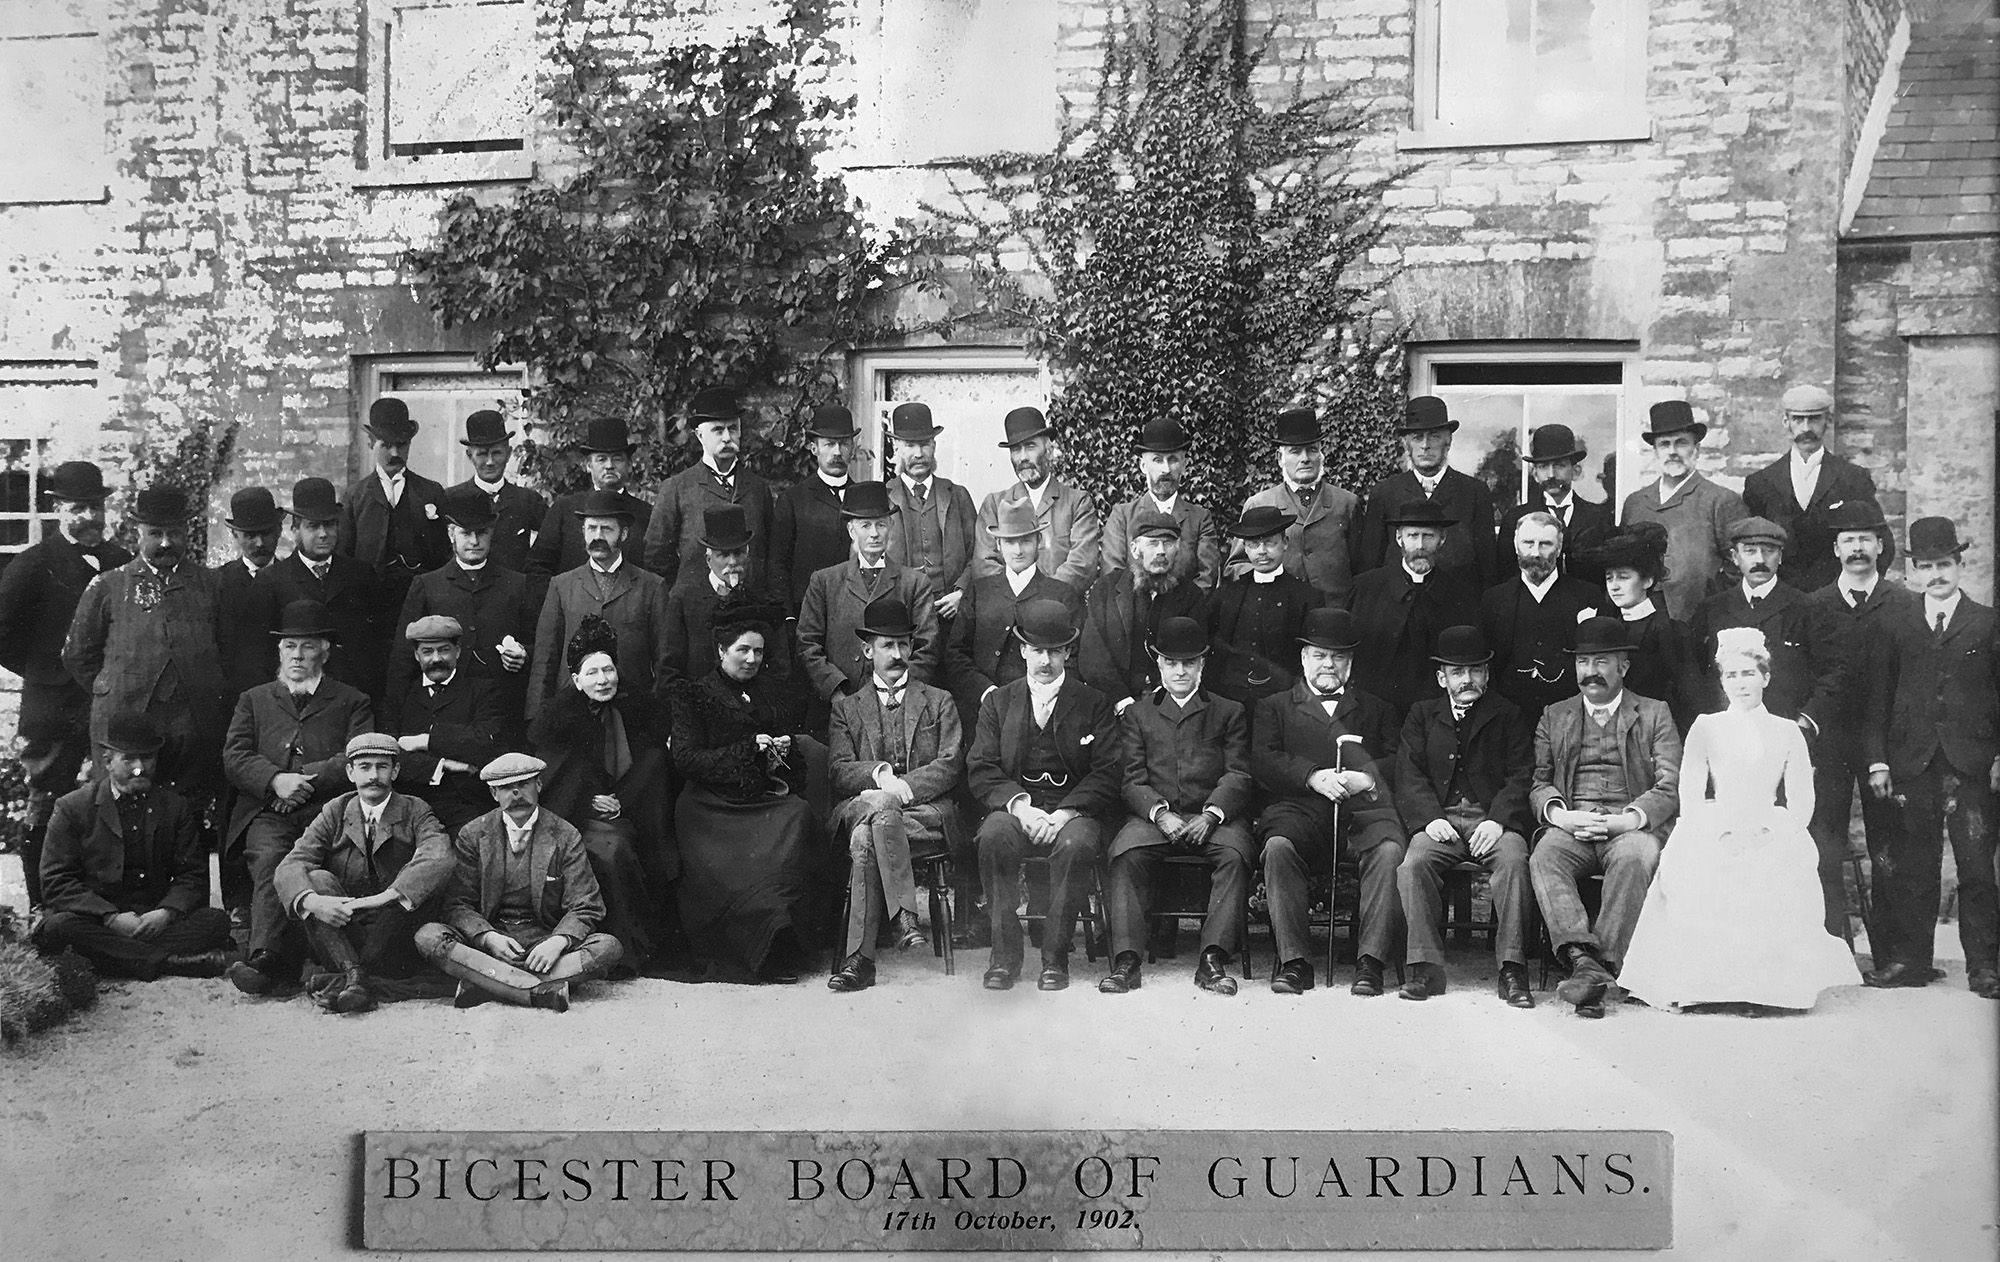 The Bicester Board of Guardians outside the workhouse in 1902.